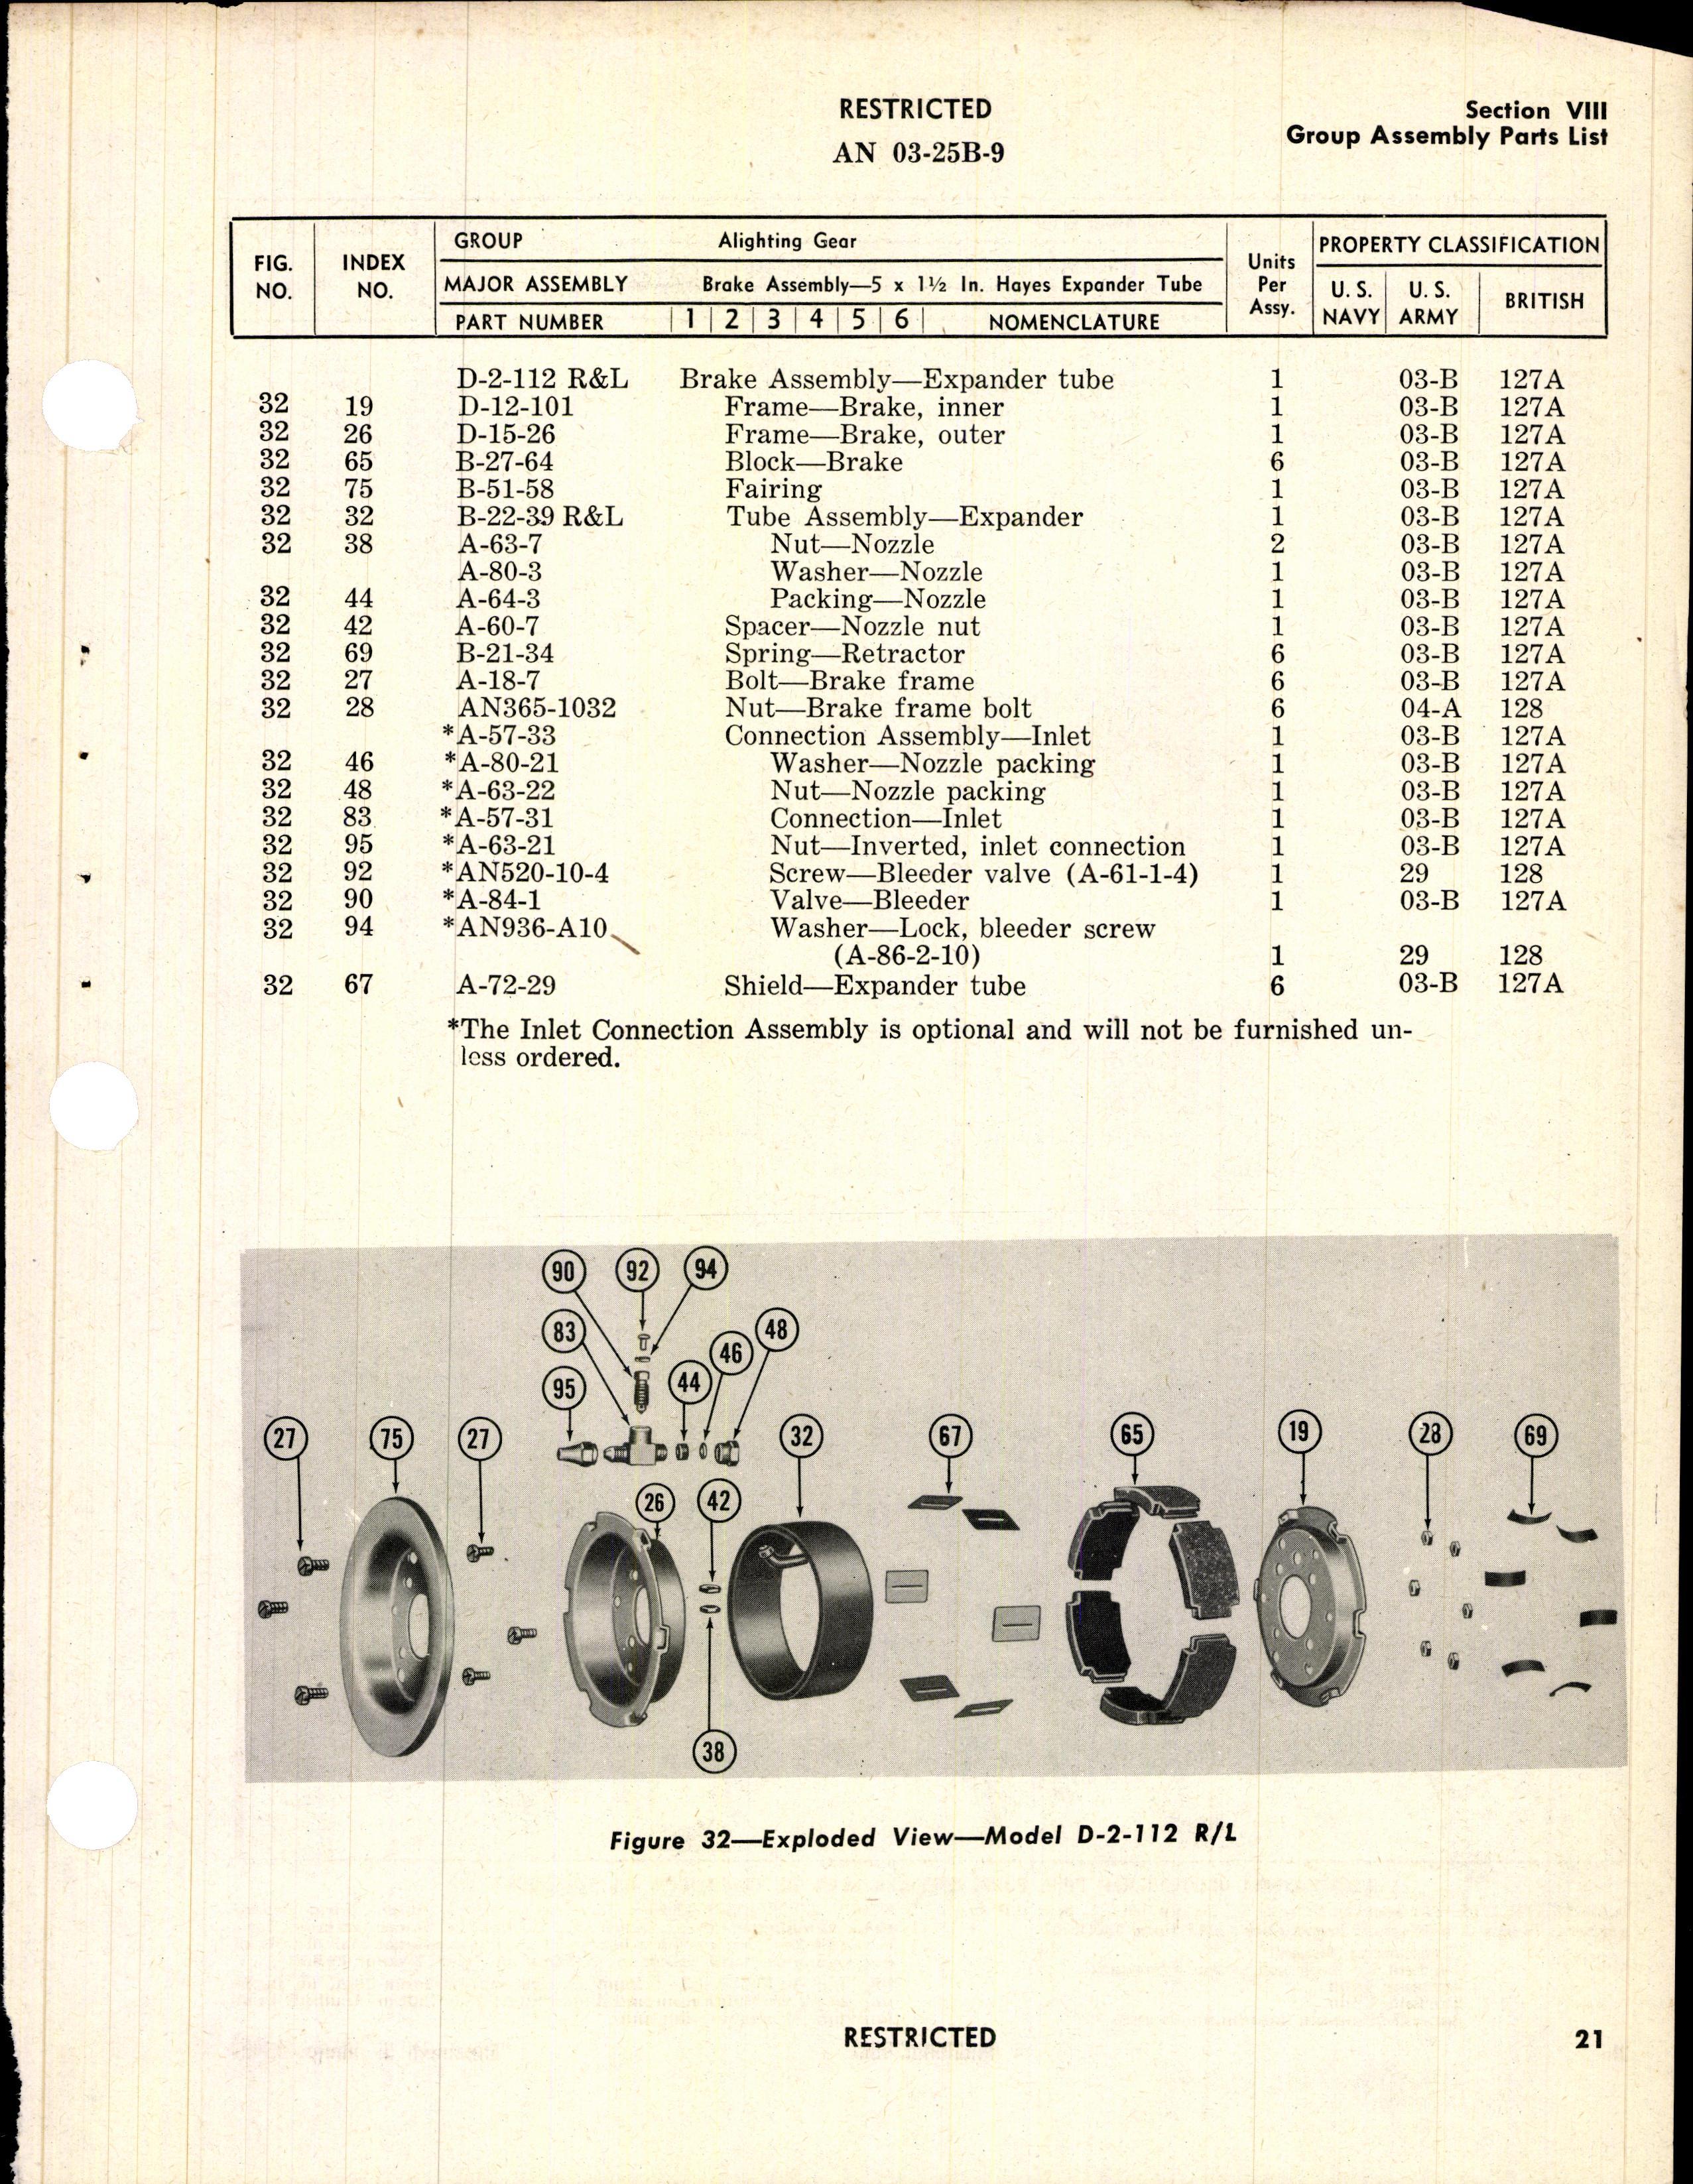 Sample page 11 from AirCorps Library document: Operation, Service & Overhaul Instructions with Parts Catalog for Expander Tube Brakes